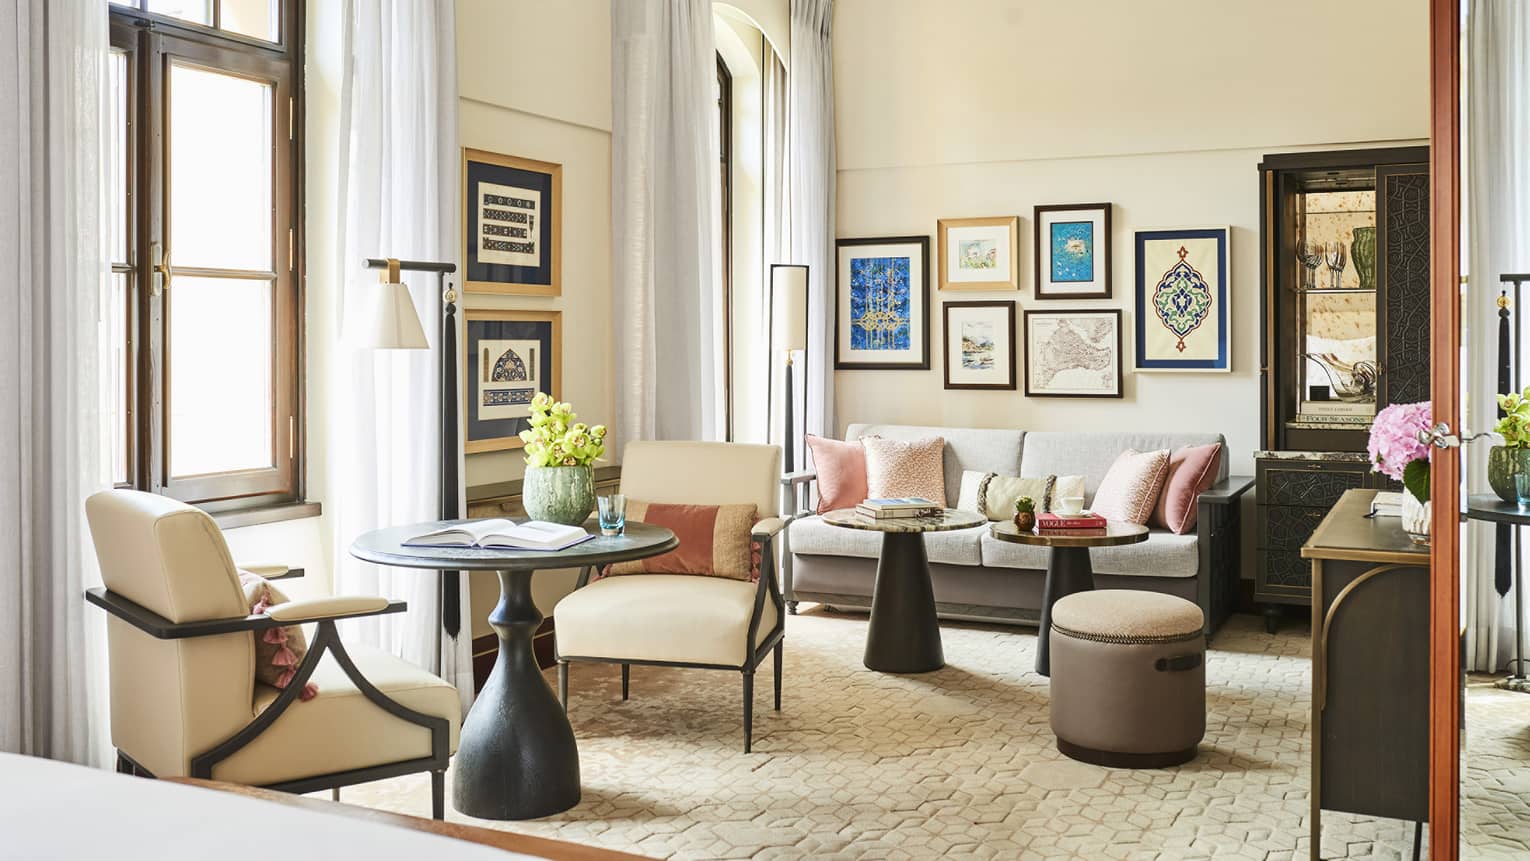 Hotel suite's living area, featuring a round table with two upholstered chairs, sofa, two coffee tables, colourful framed prints on the wall and two French windows